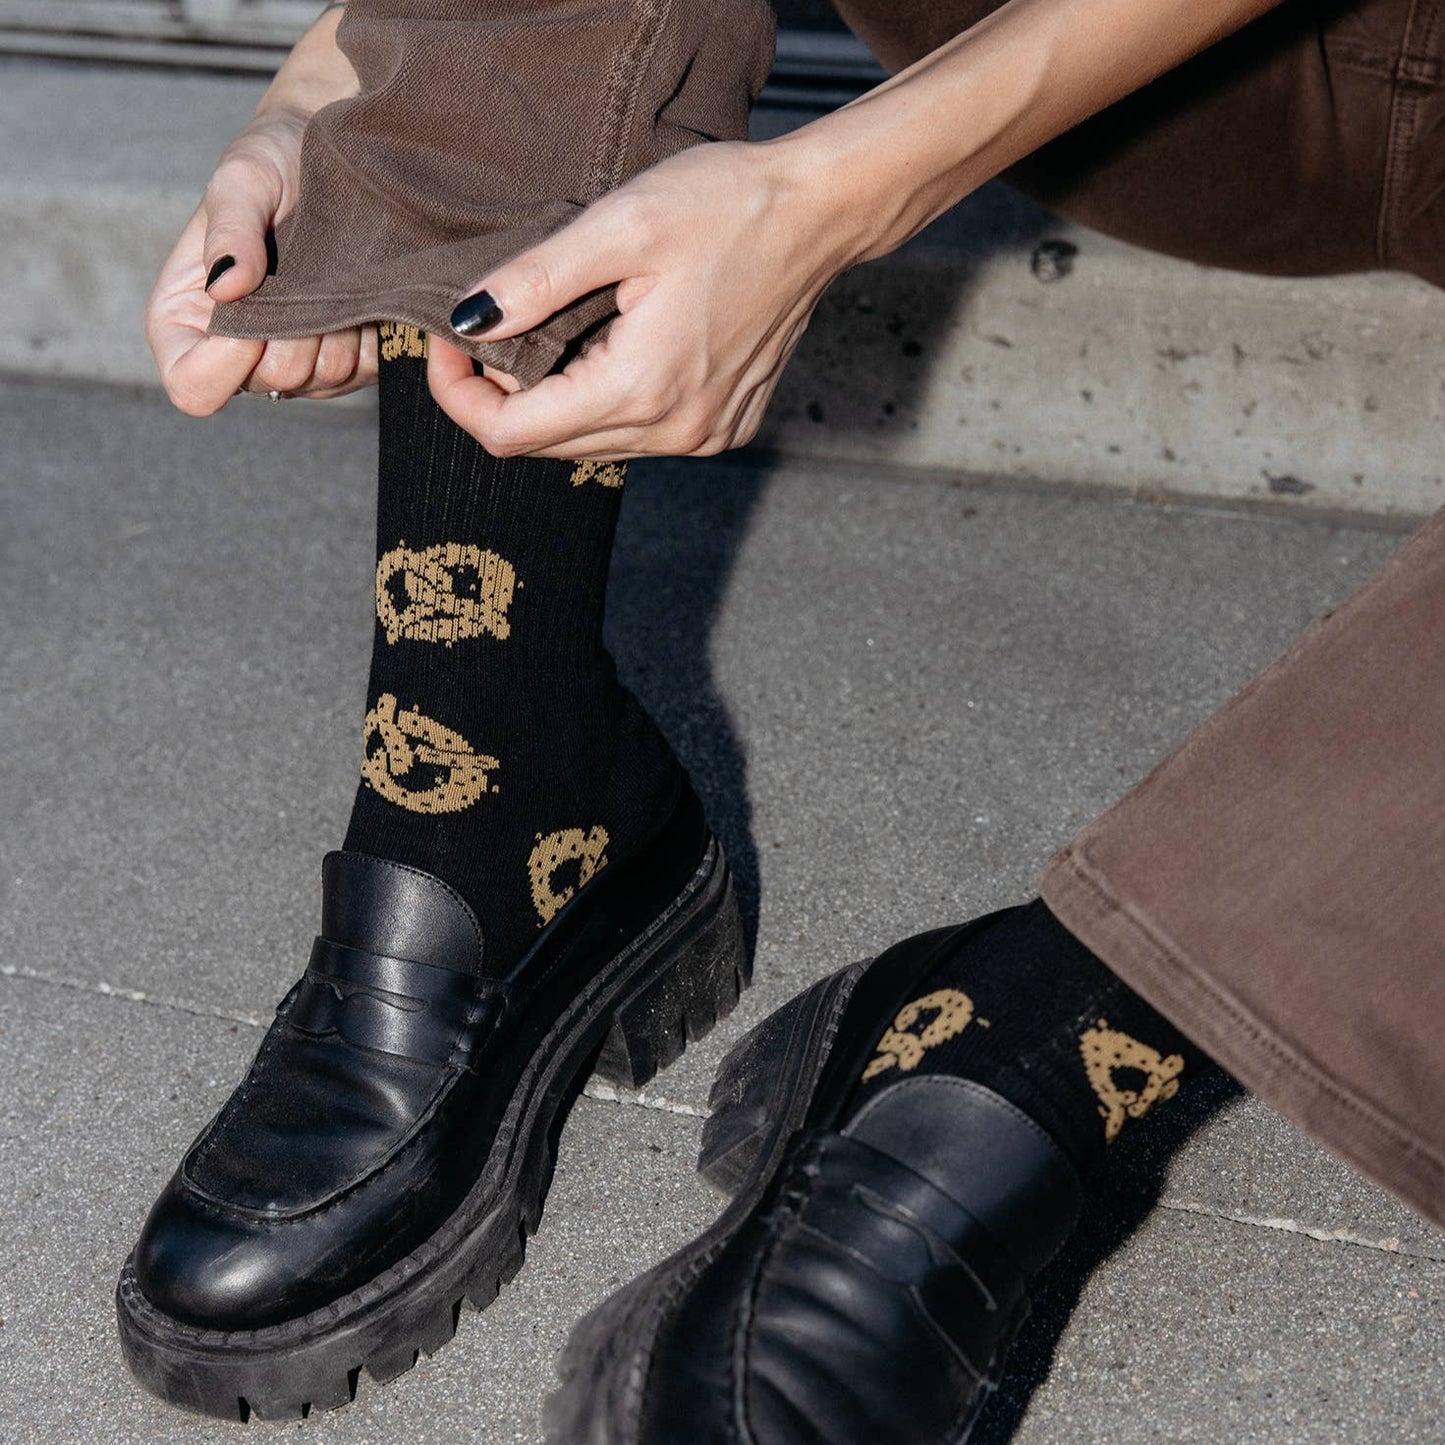 Model wearing pretzel socks cuffing her pant as an action shot.